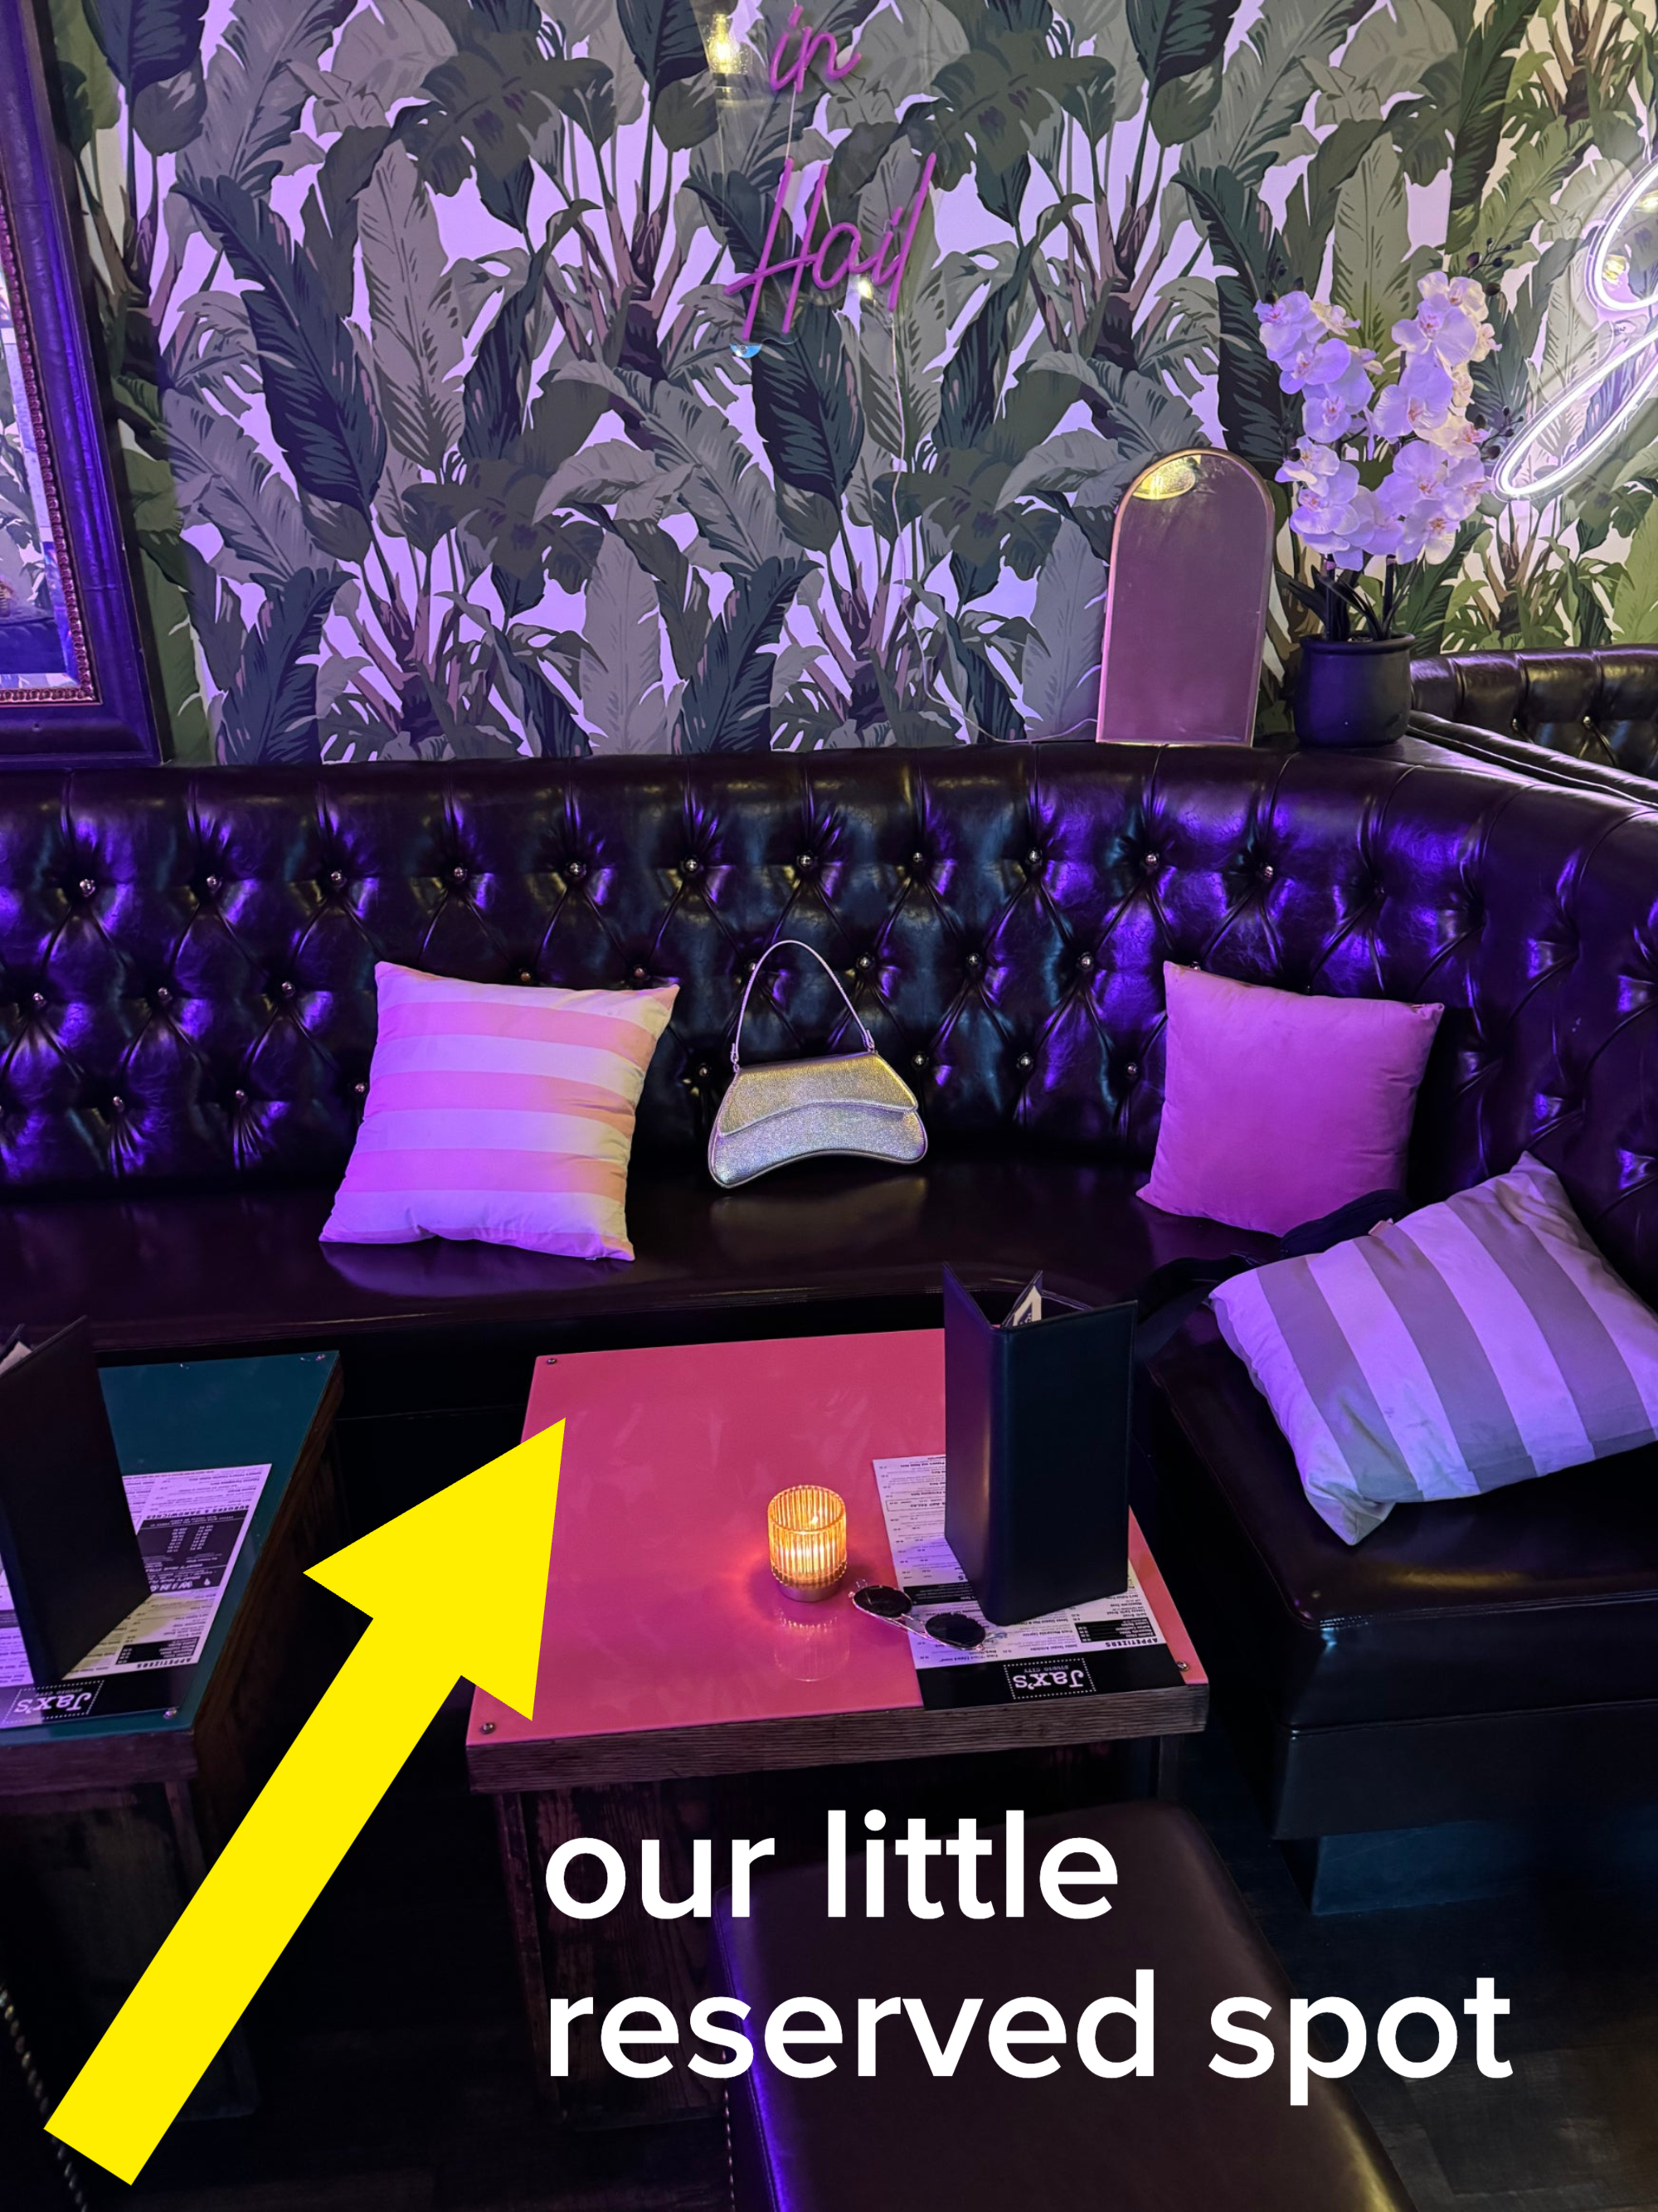 Restaurant booth with pillows, a menu, and a lit candle on the table